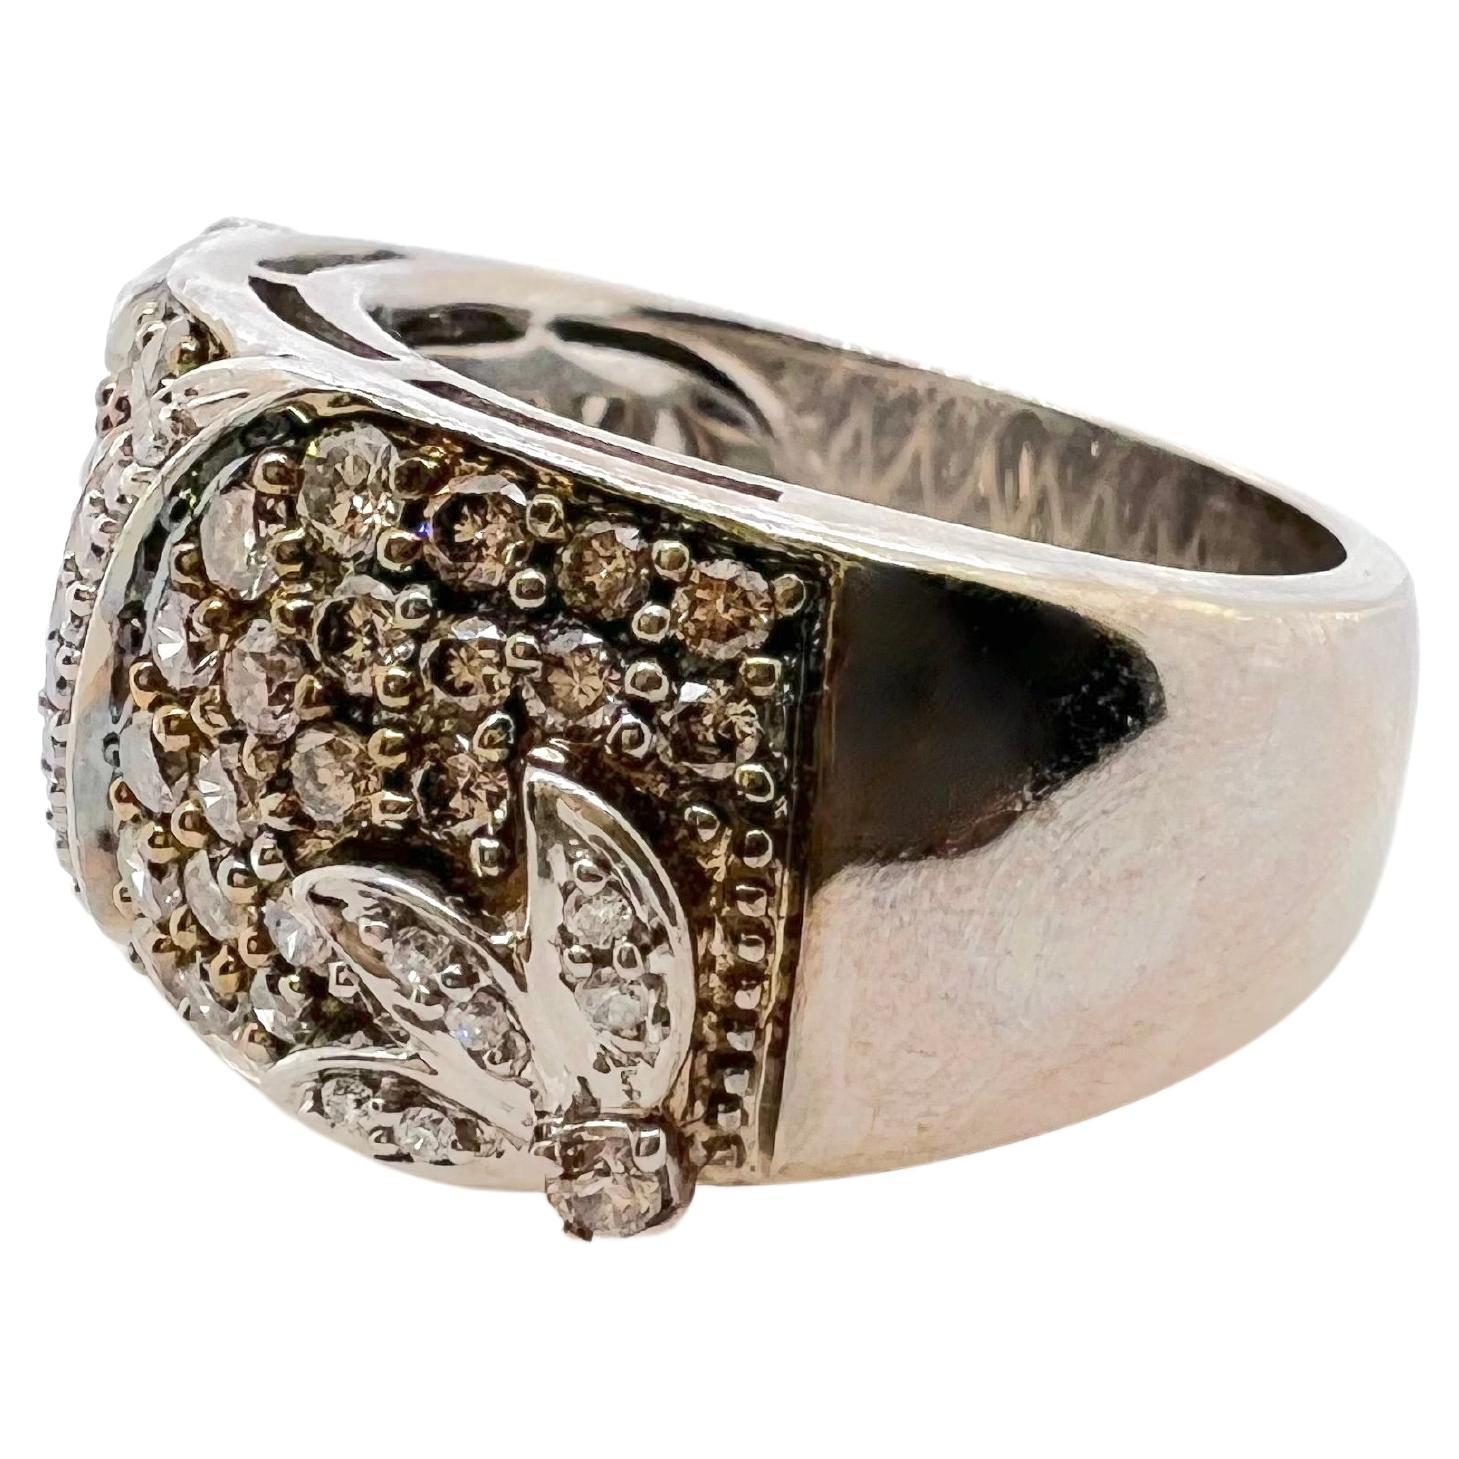 This beautiful champagne-colored diamond band is set in a 14k white gold mounting!  This ring is an eye-catcher with a small number of white diamonds to contrast the colored diamonds.  This can be worn smart casual or dressed up!


Size: 6.75 / can